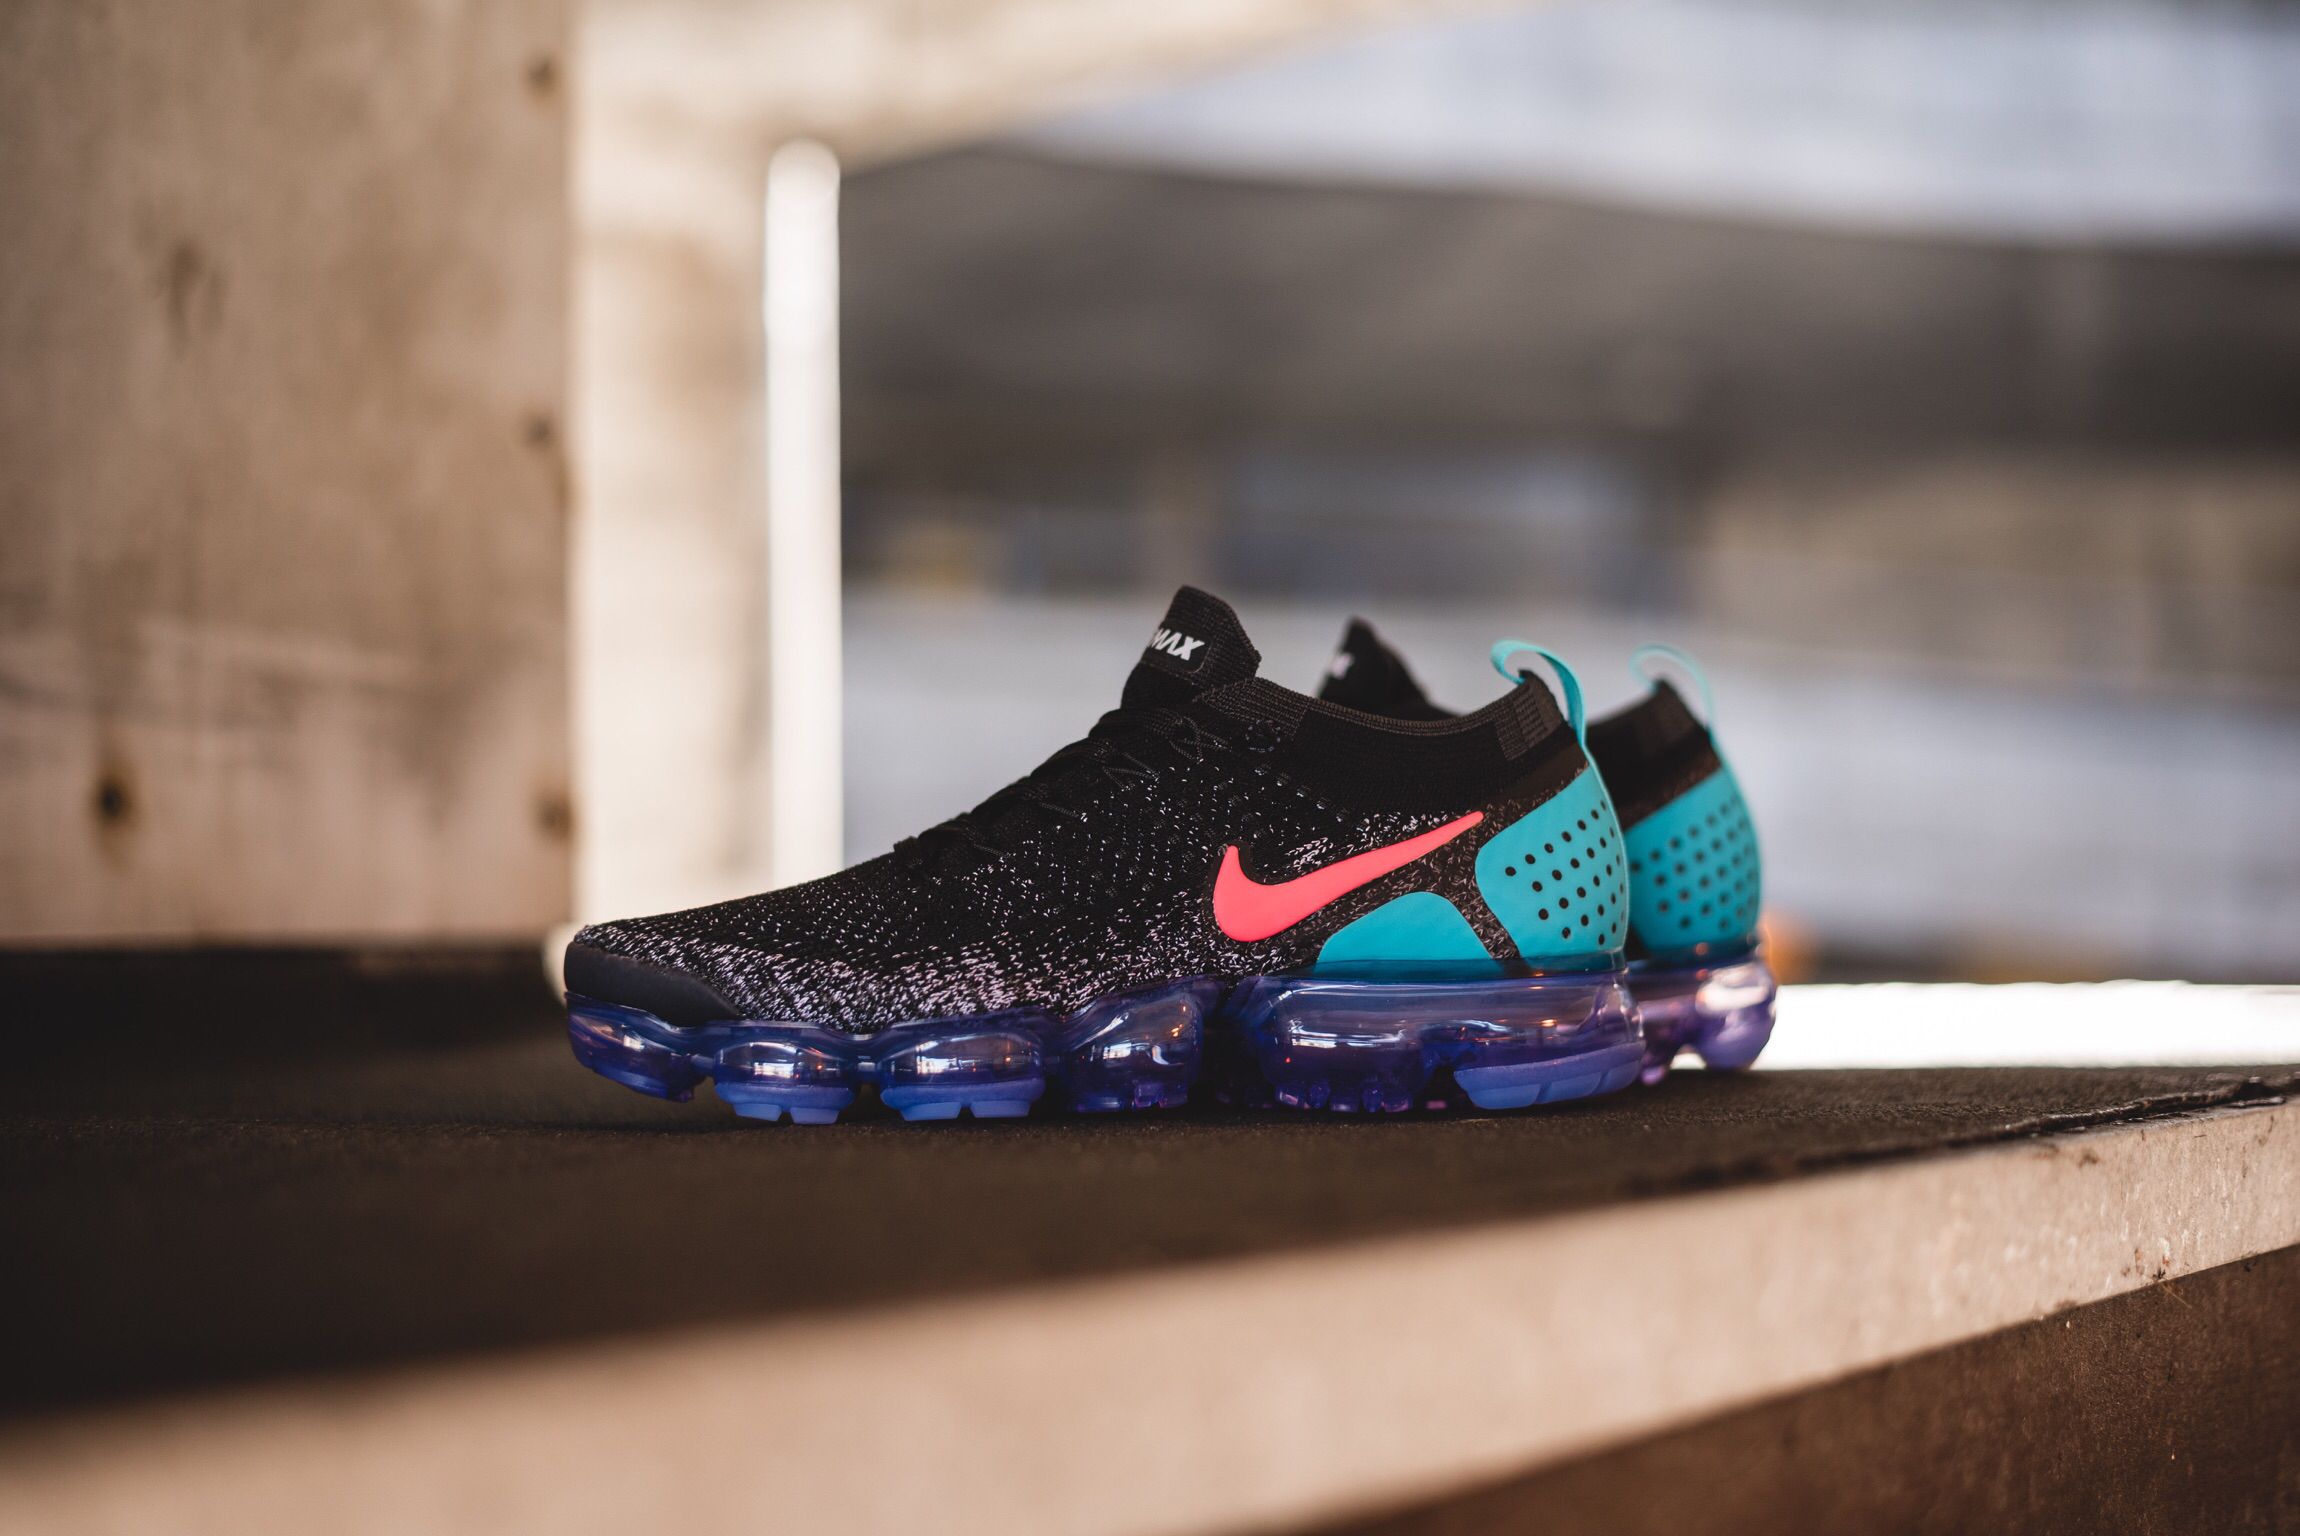 on "Nike VaporMax Flyknit 2.0 "Air Moves You" is available to buy ONLINE now! #hanon #nike #airvapormax #airvapormaxflyknit https://t.co/Gu6uNZG72y https://t.co/AcyhQq9Cn7" /